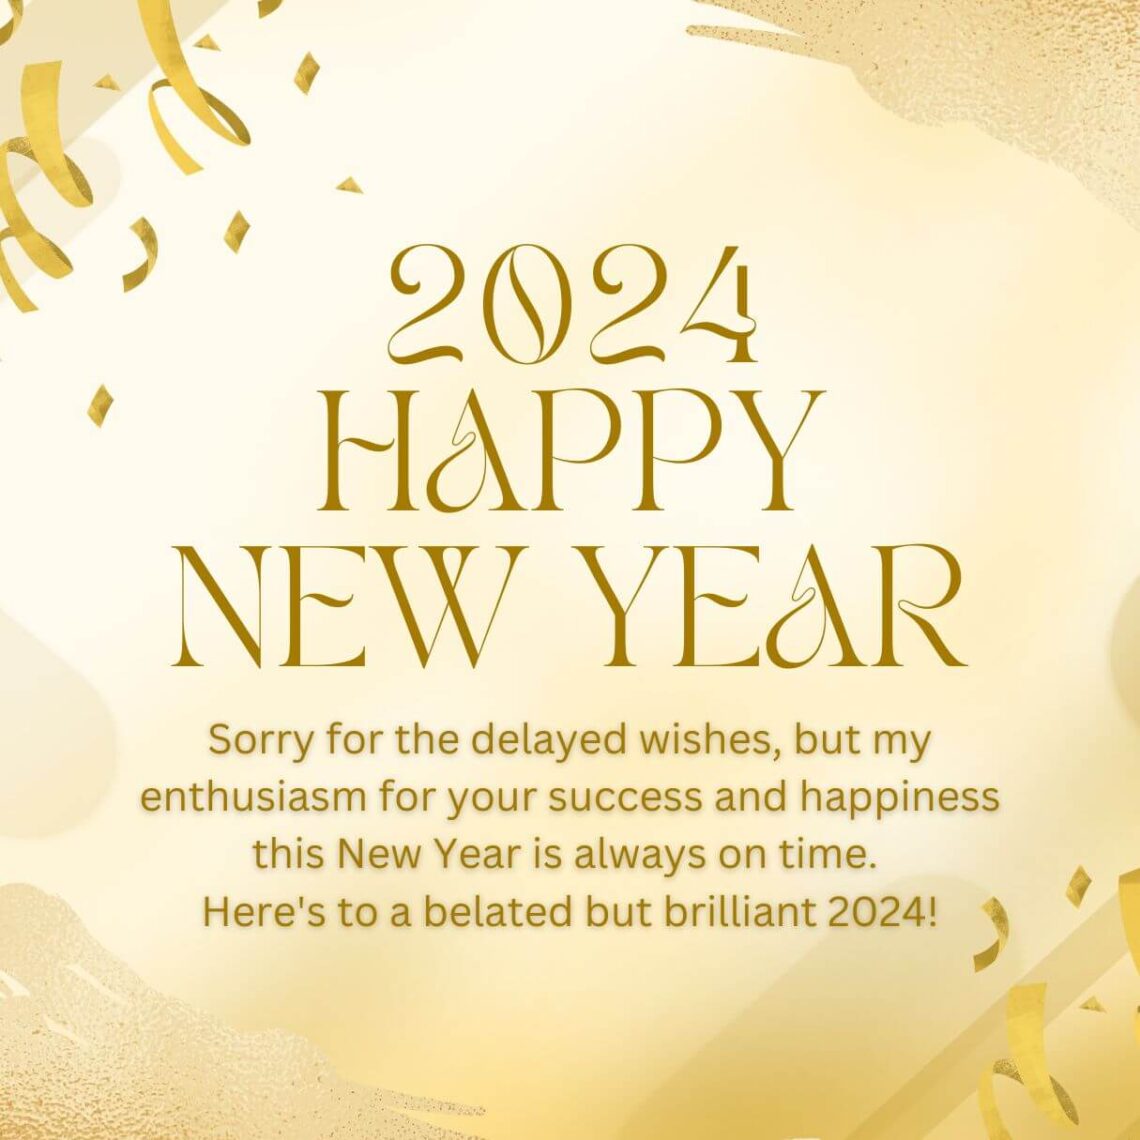 50 Belated Happy New Year 2024 Wishes & Images Hug2Love